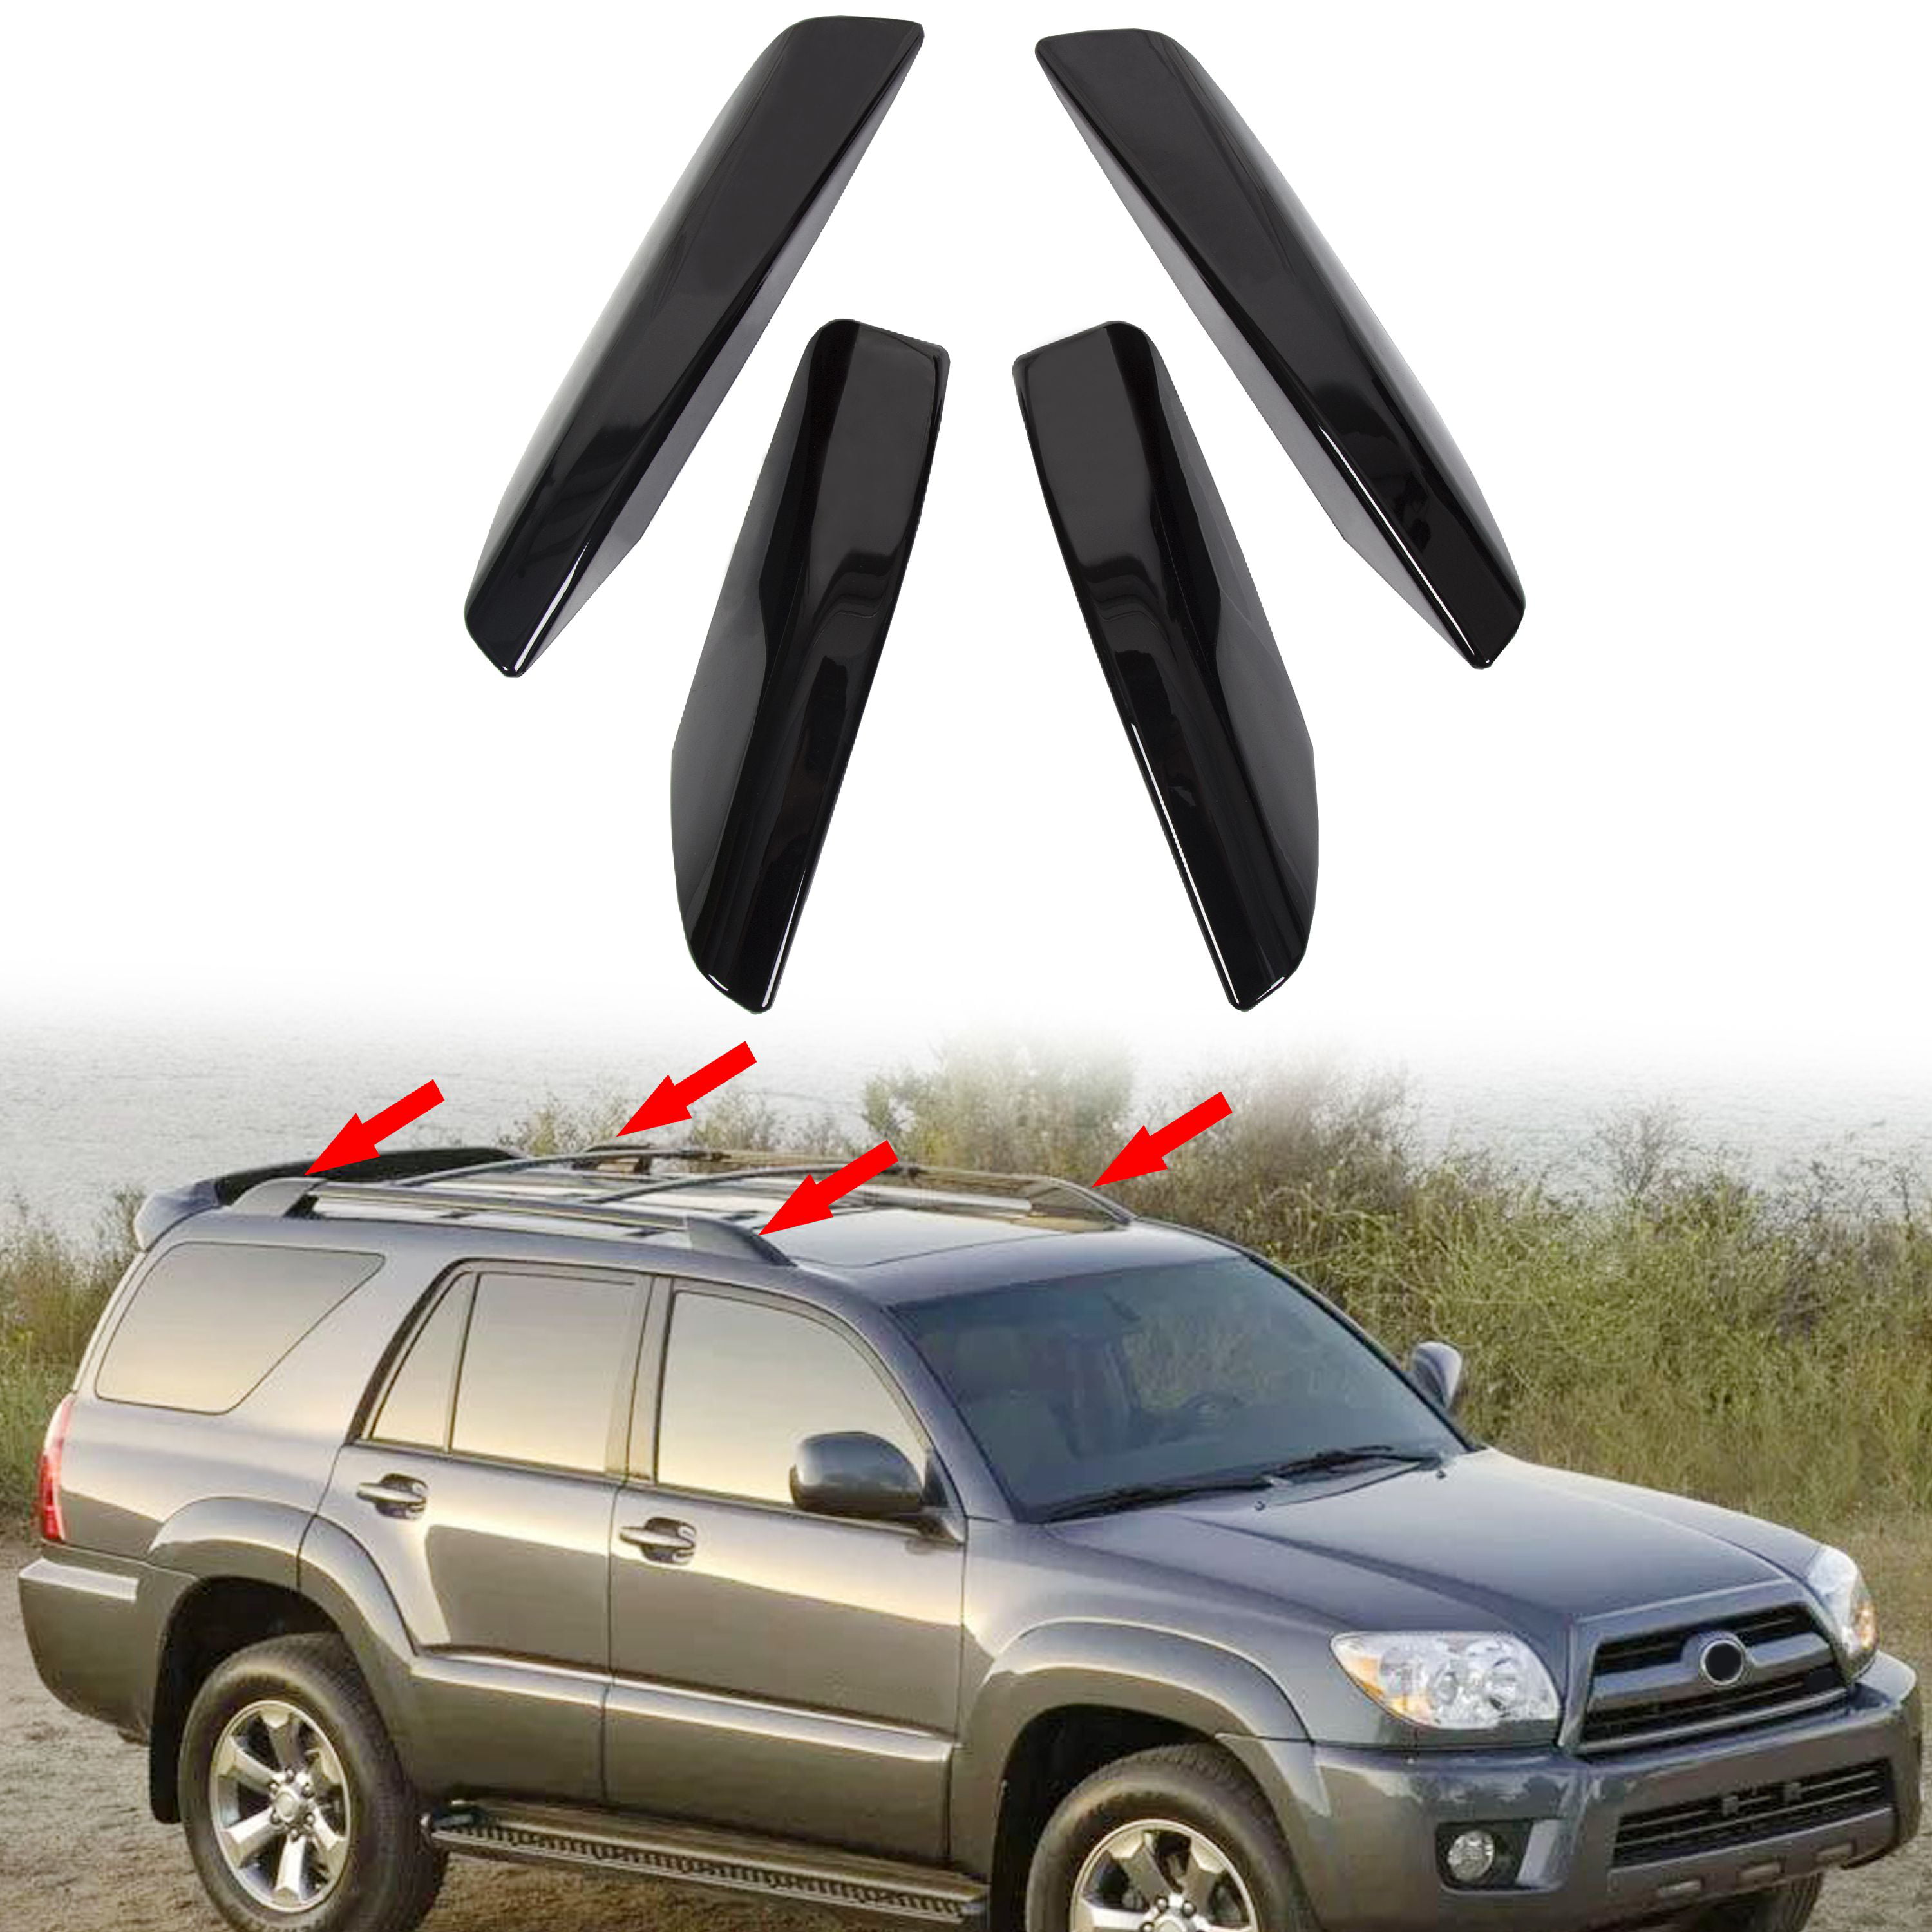 4*Black Roof Luggage Rack Bar End Cover Shell For Toyota 4Runner 2010-2019 ABS